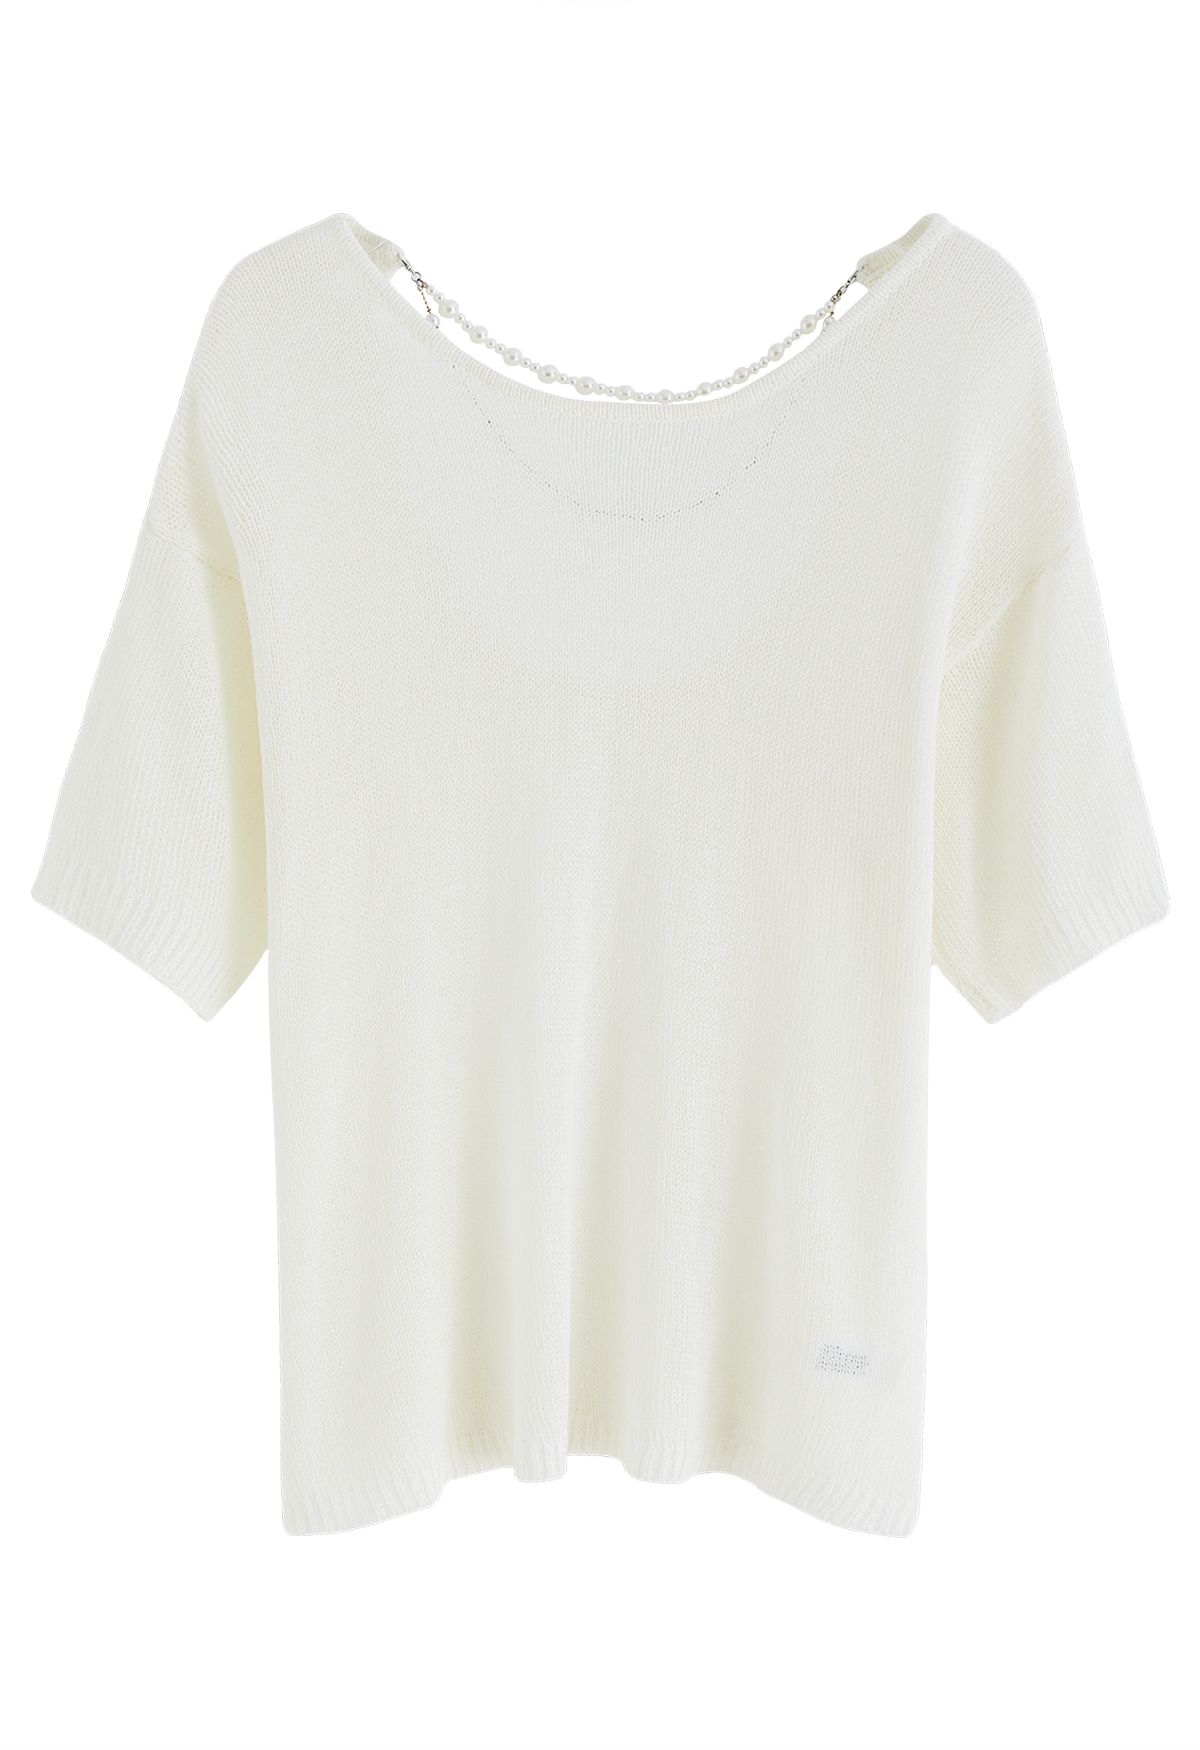 Pearl Necklace Short Sleeve Knit Top in Ivory